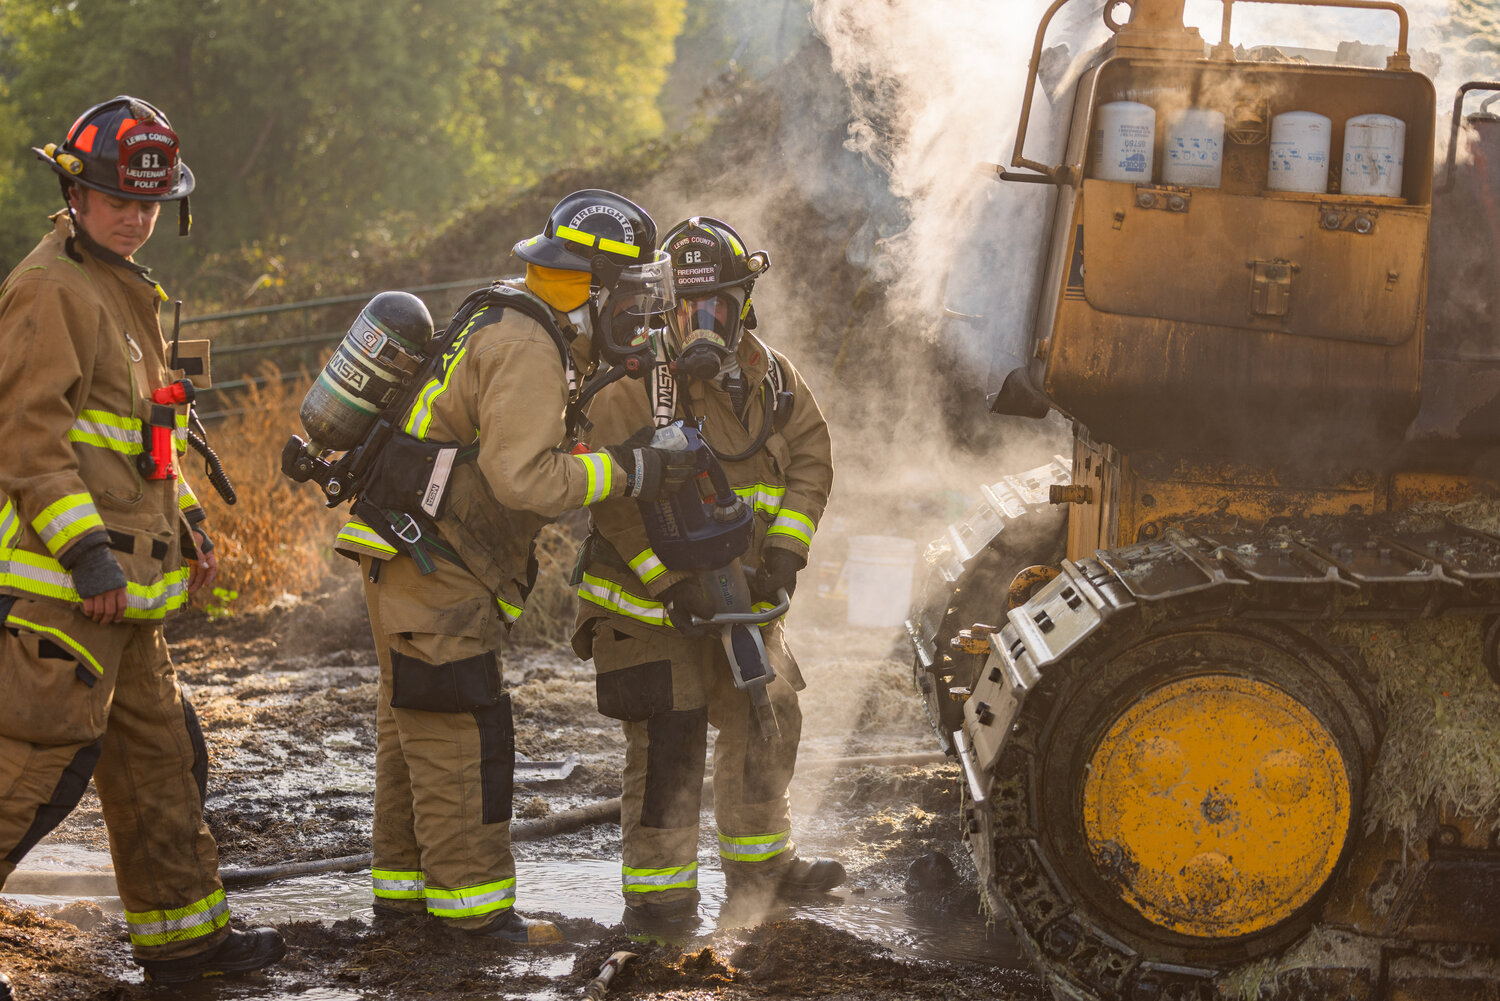 First responders from Lewis County Fire District 6 use jaws of life while working to put out a fire inside a piece of machinery at the Osborne Dairy west of Chehalis on Sunday, Sept. 10.